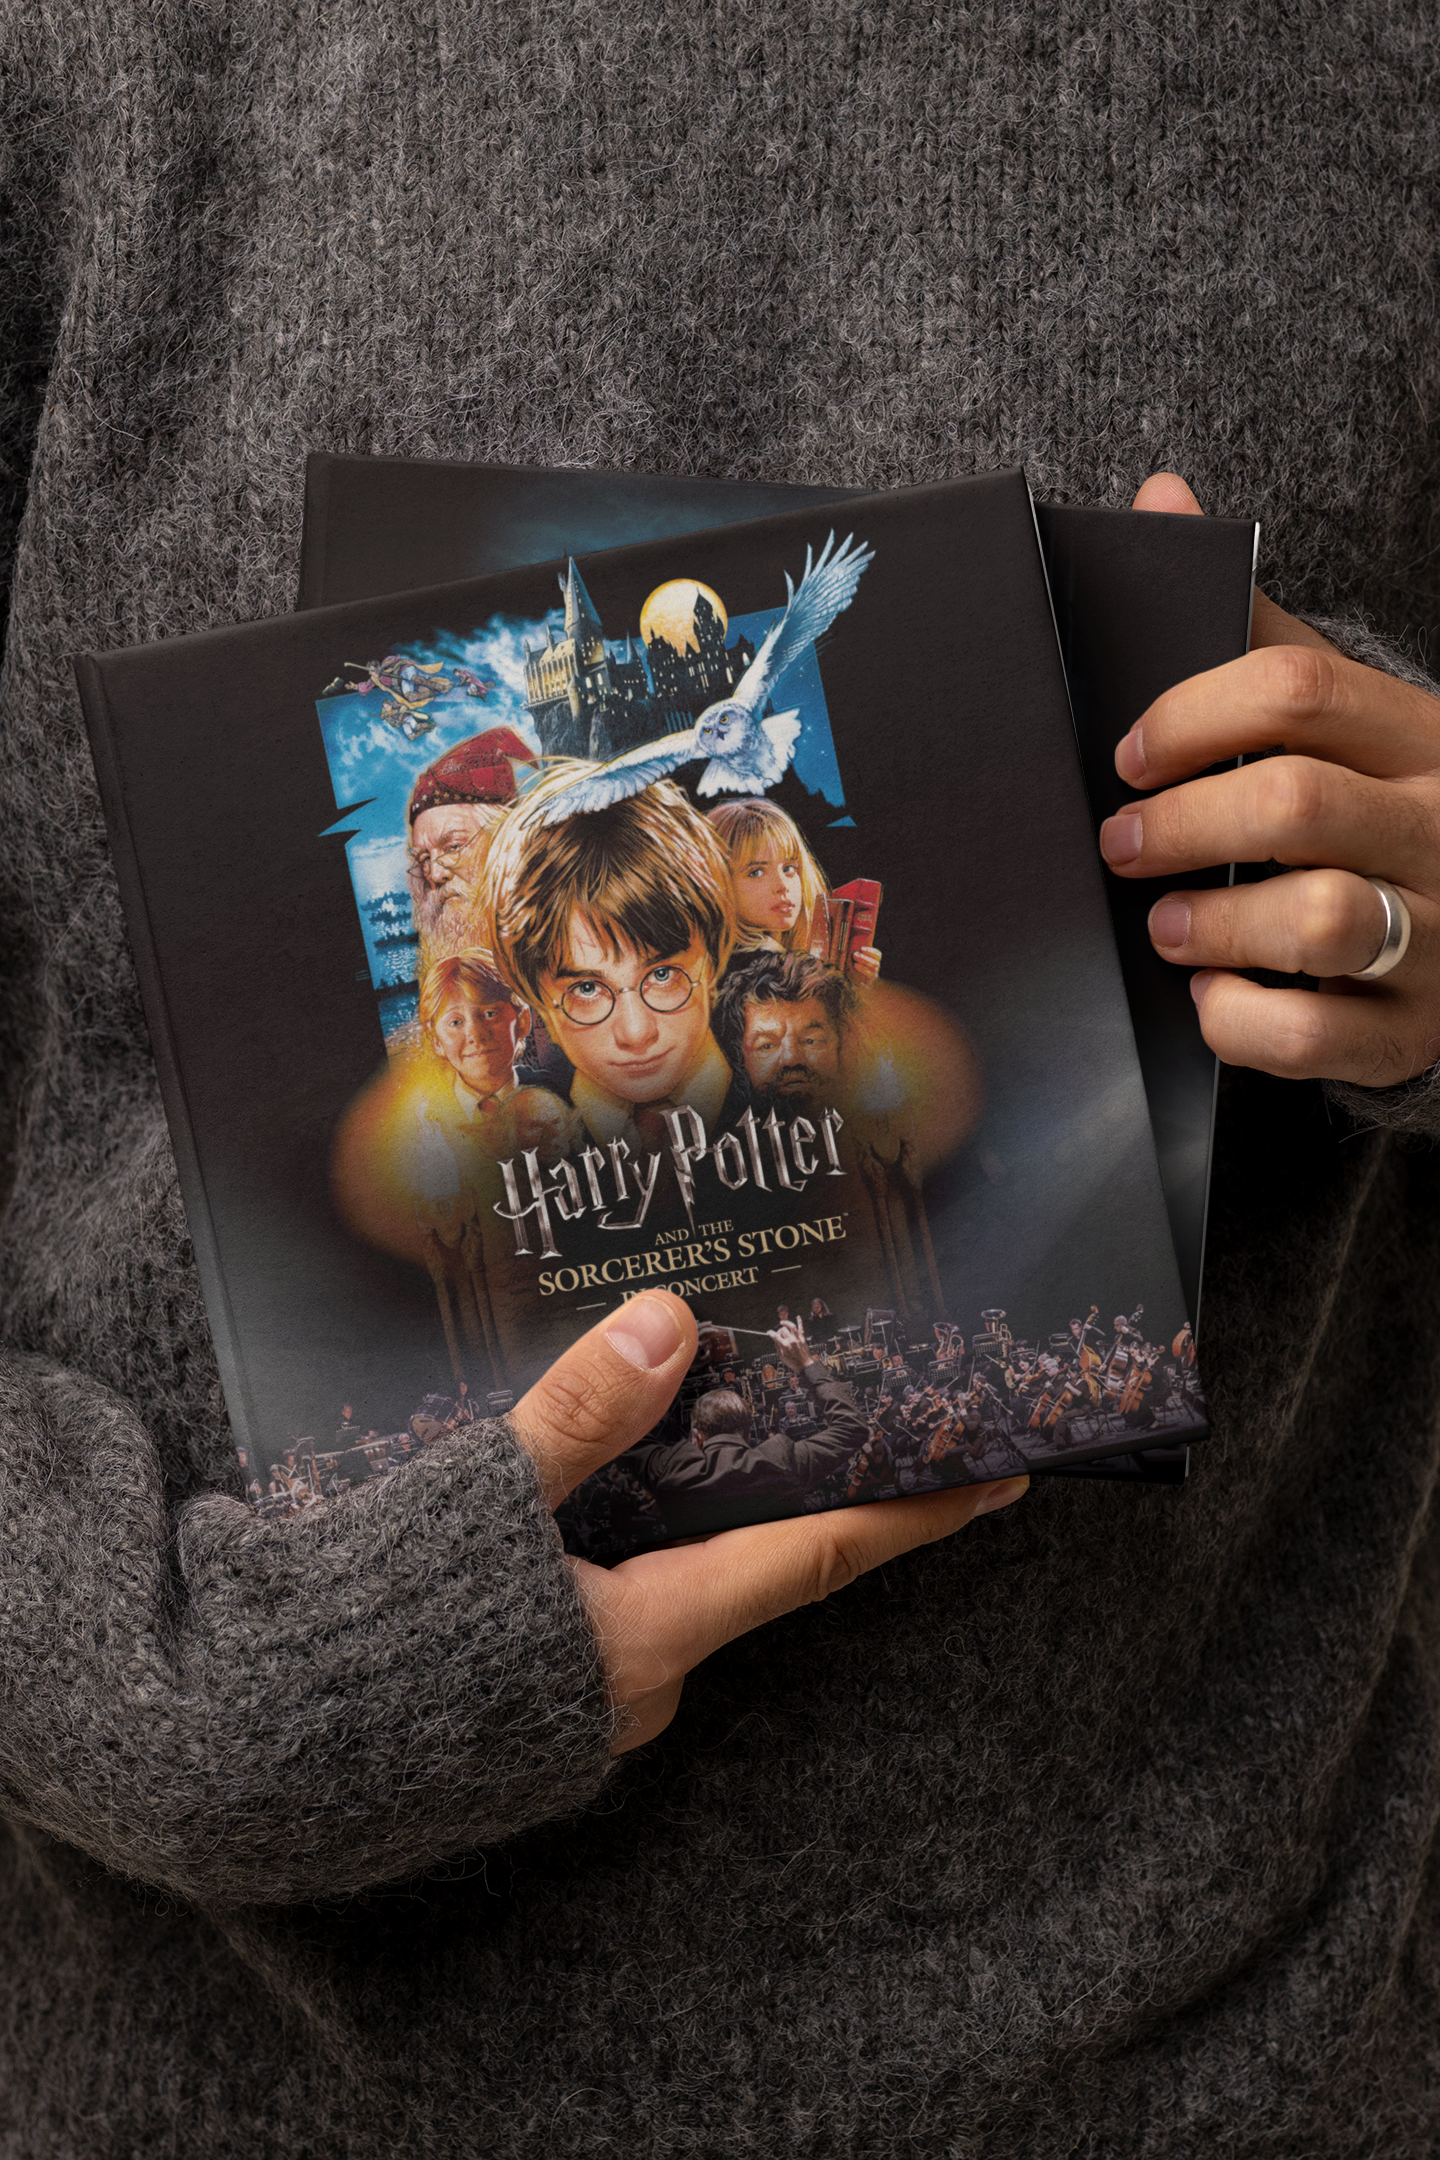 Harry Potter and the Sorcerer's Stone™ in Concert Hardcover Program Book